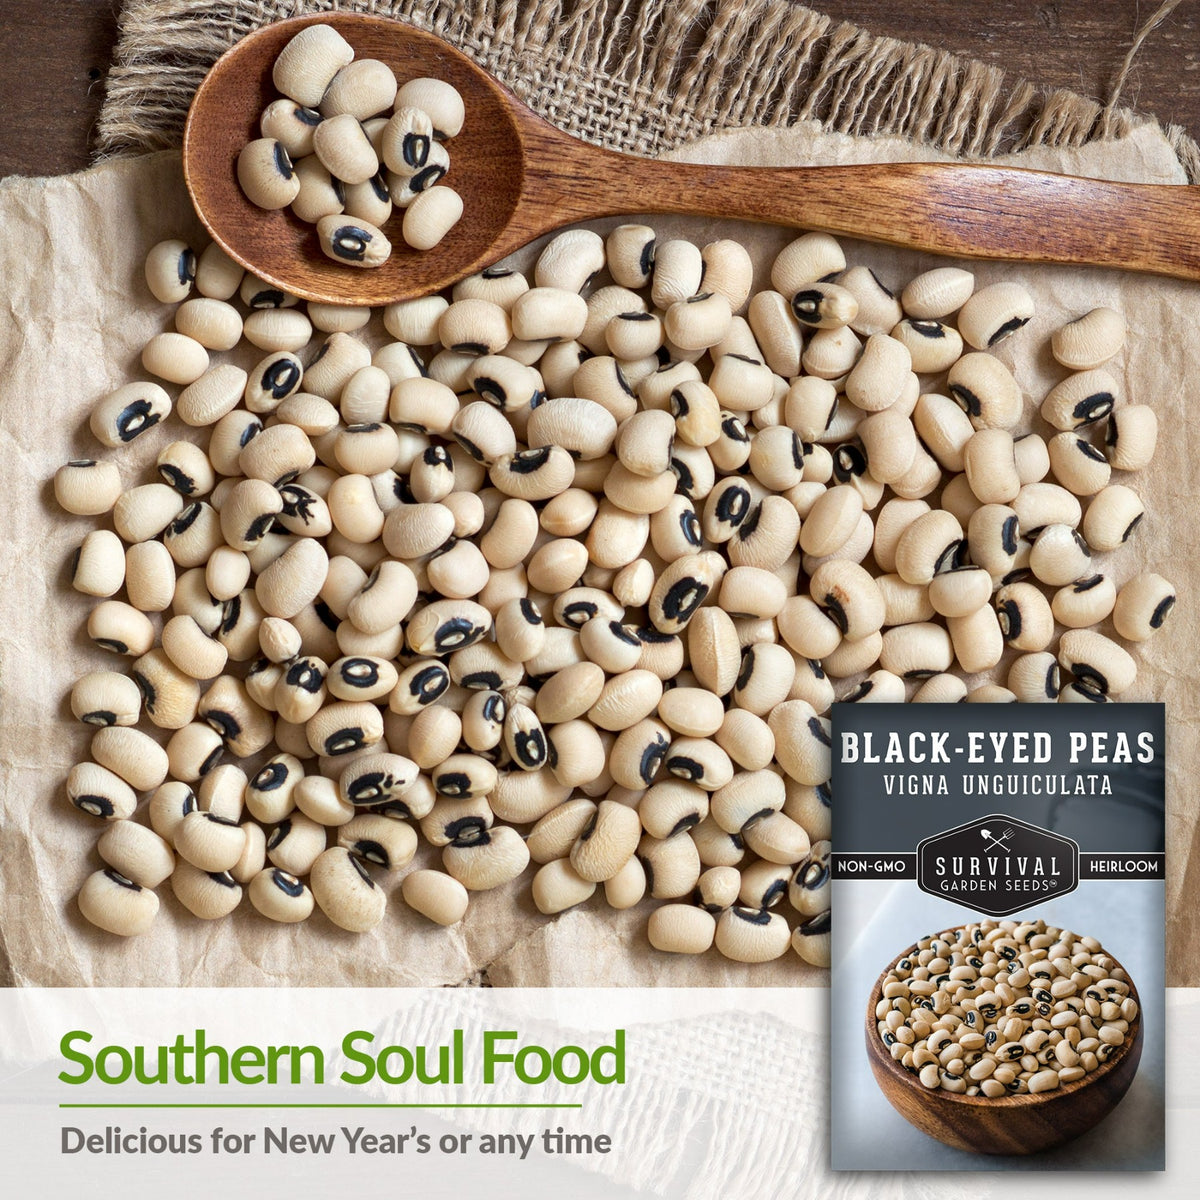 Black-eyed peas are a southern soul food